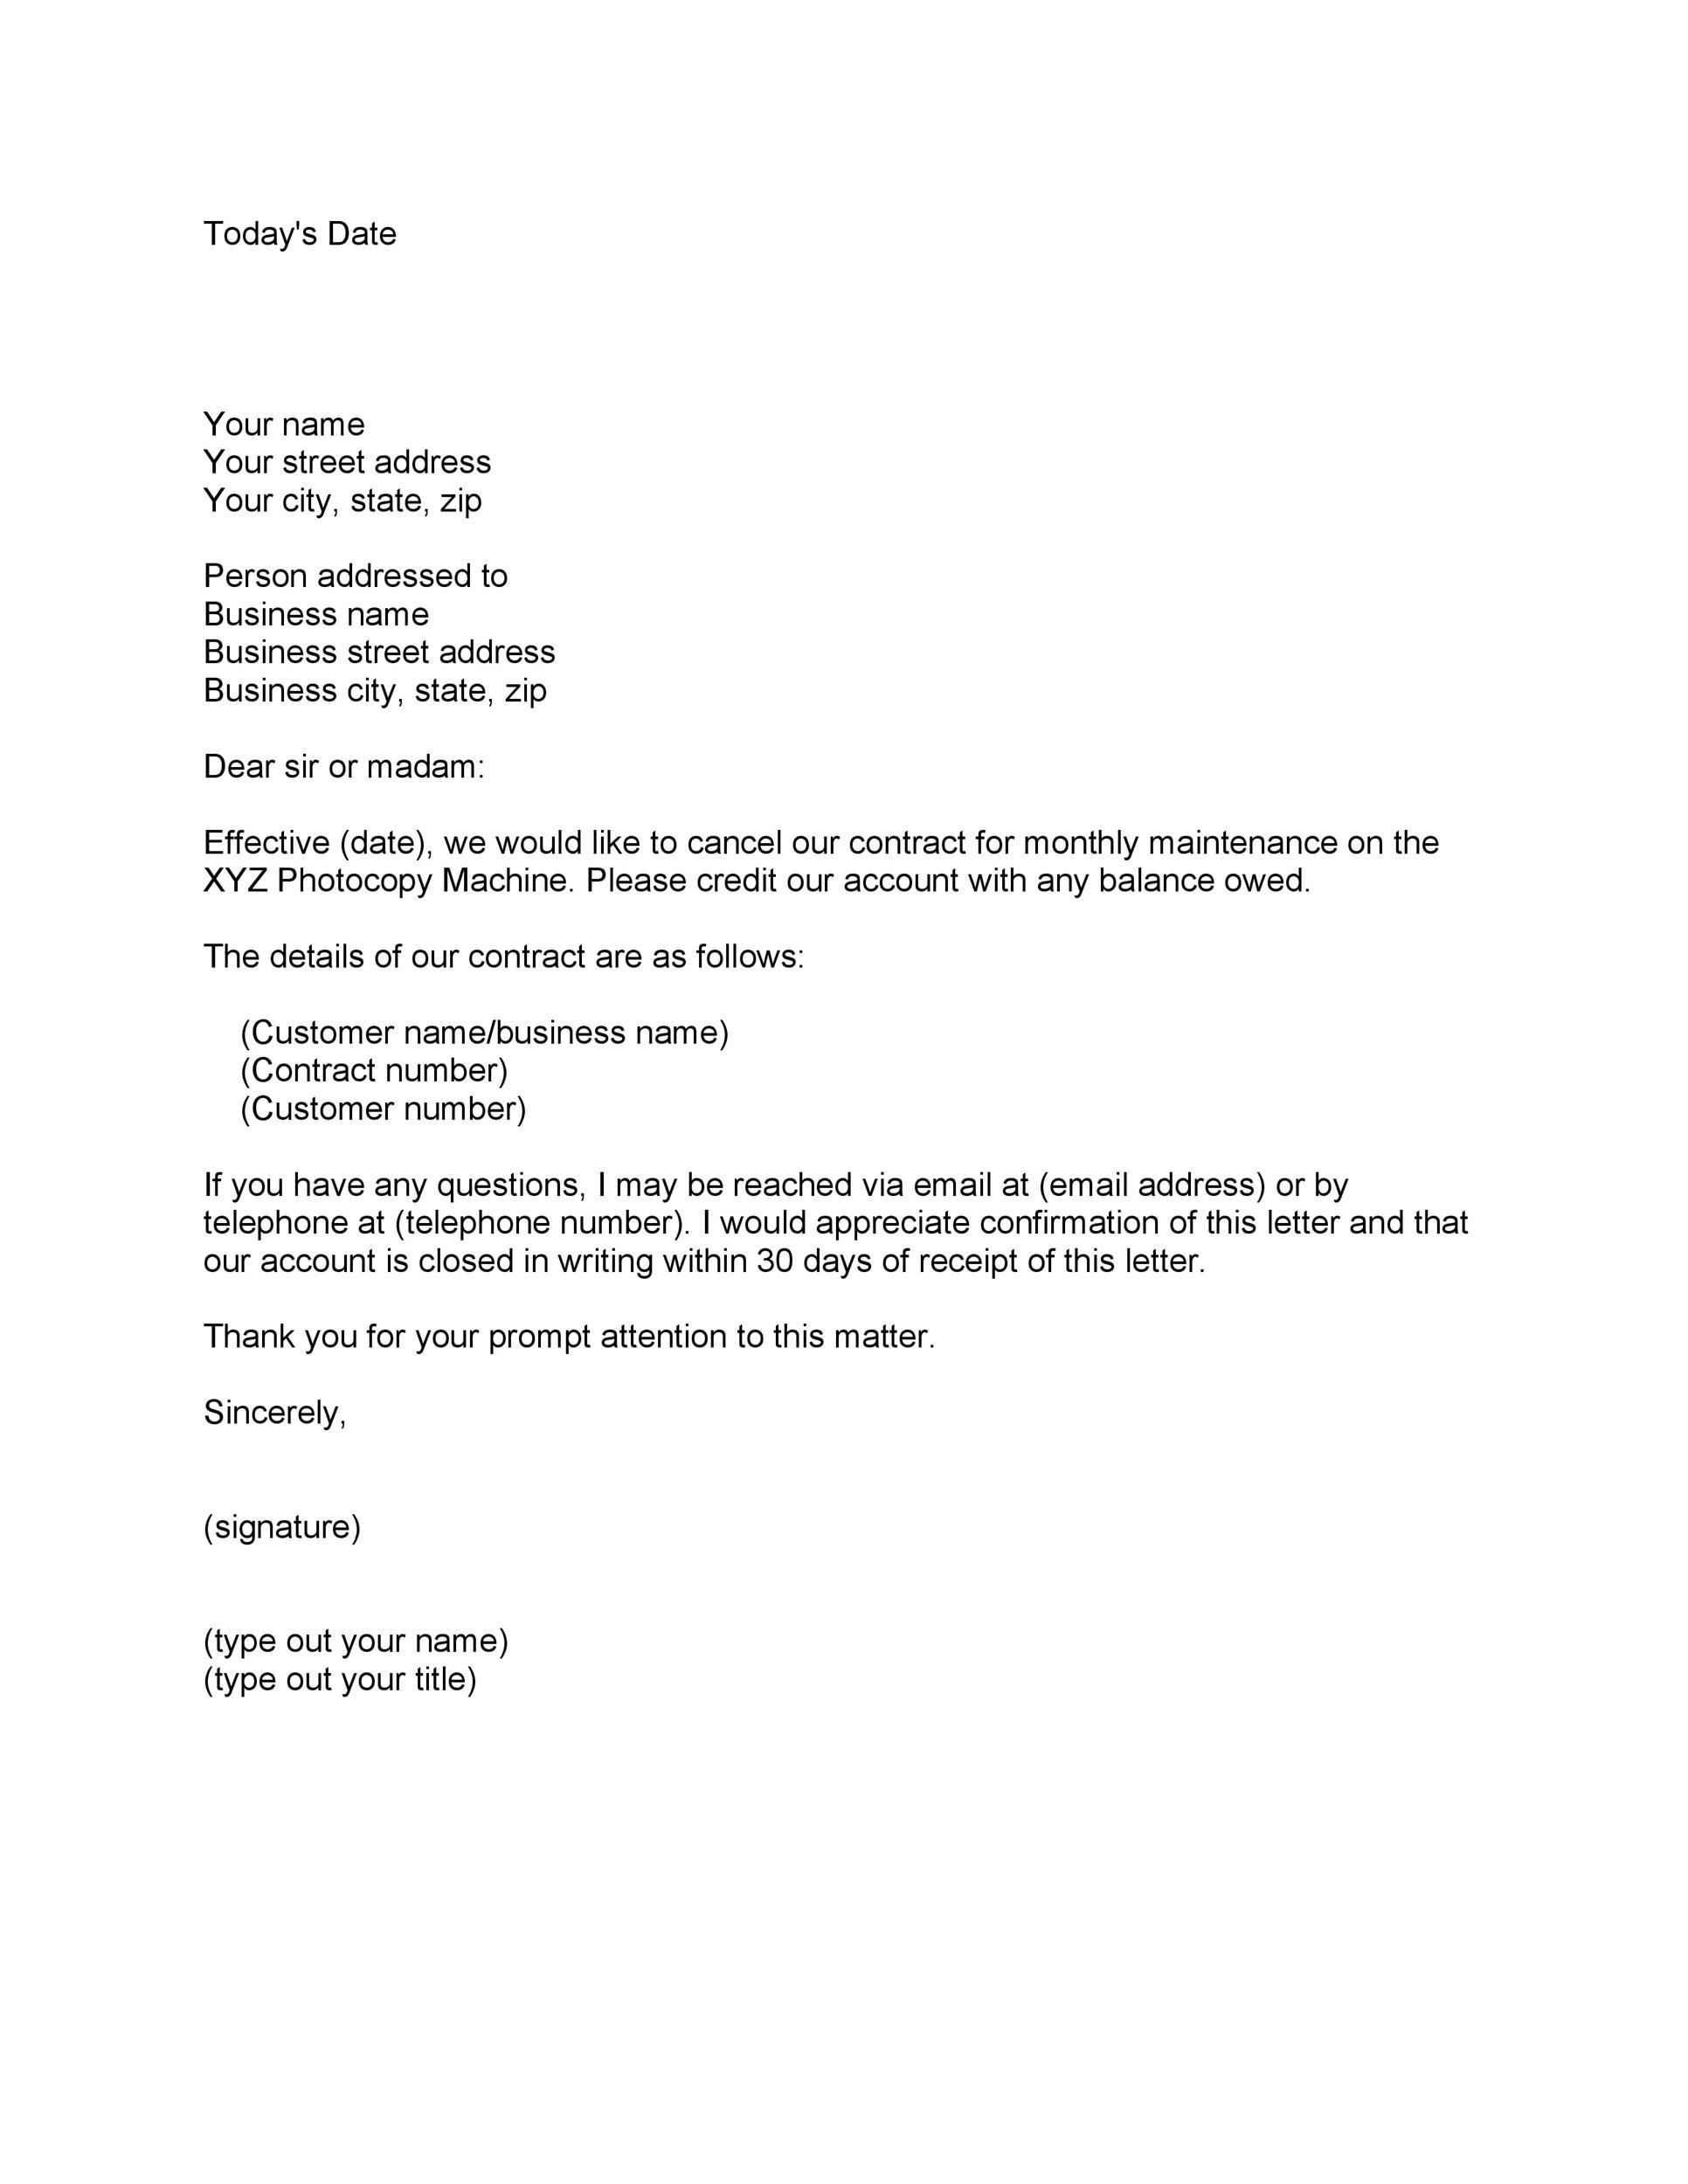 Letter To Discontinue Service Contract from templatelab.com